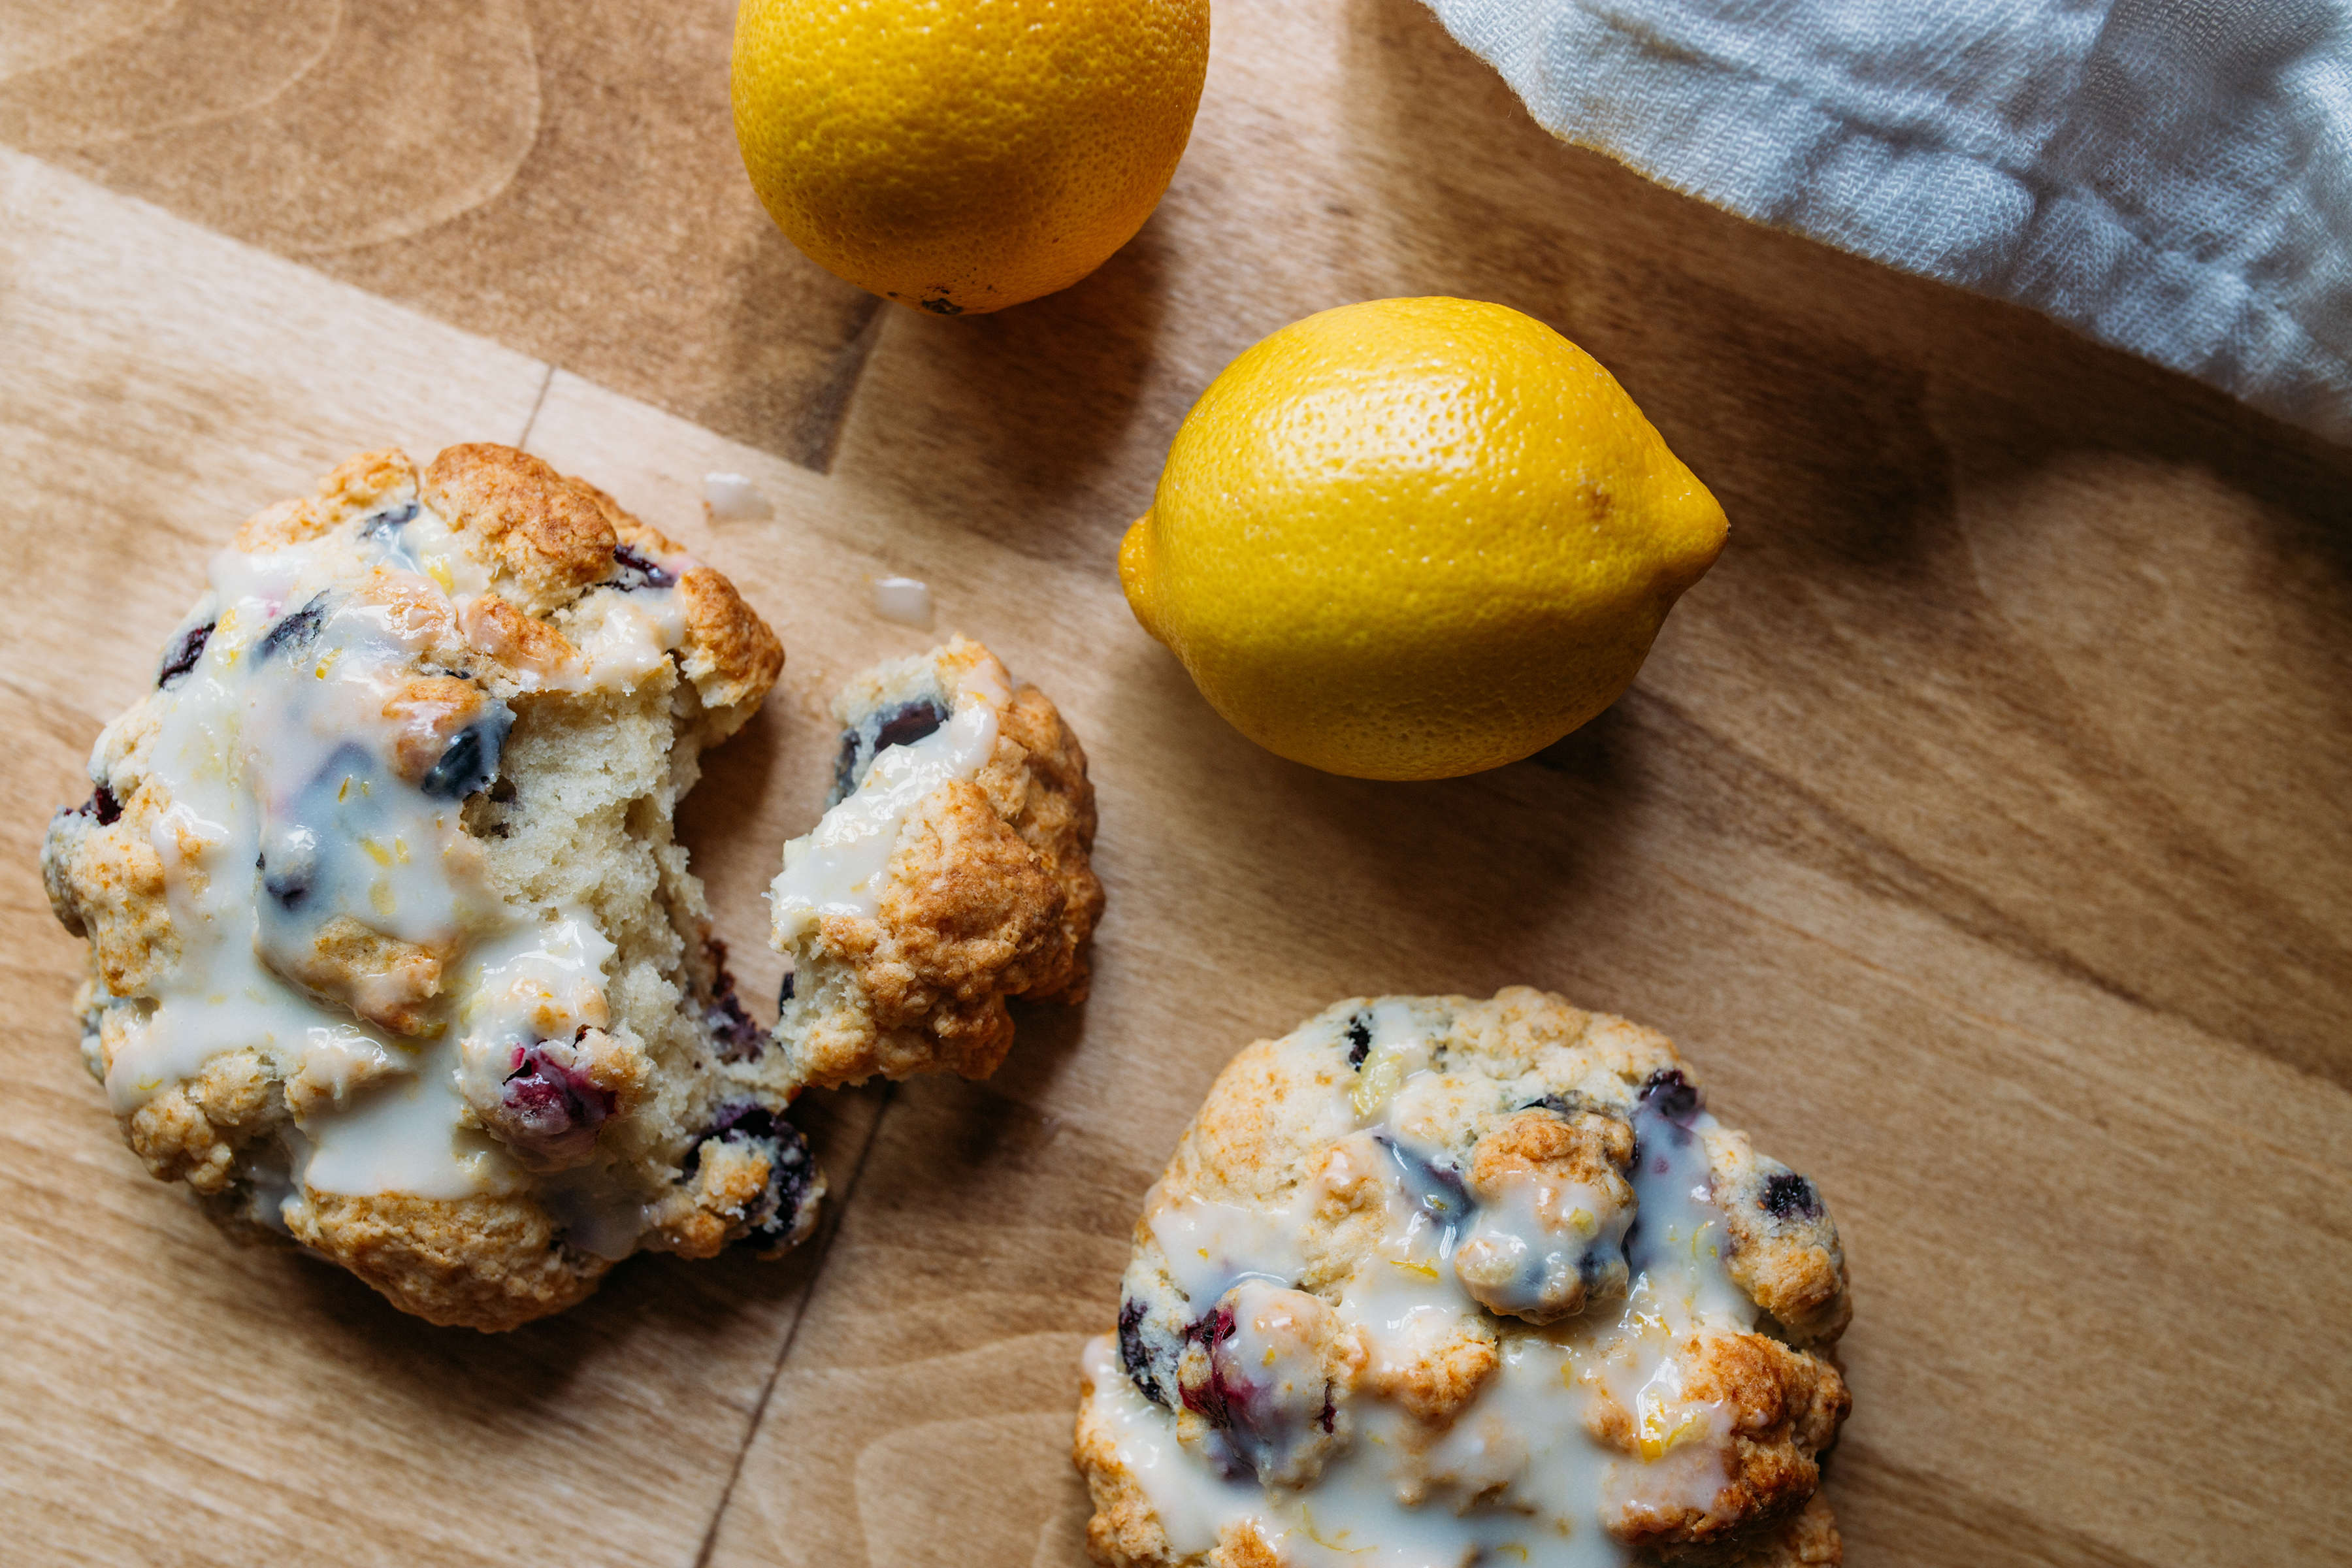 Blueberry muffin biscuits on a wooden serving board, next to some fresh lemons.